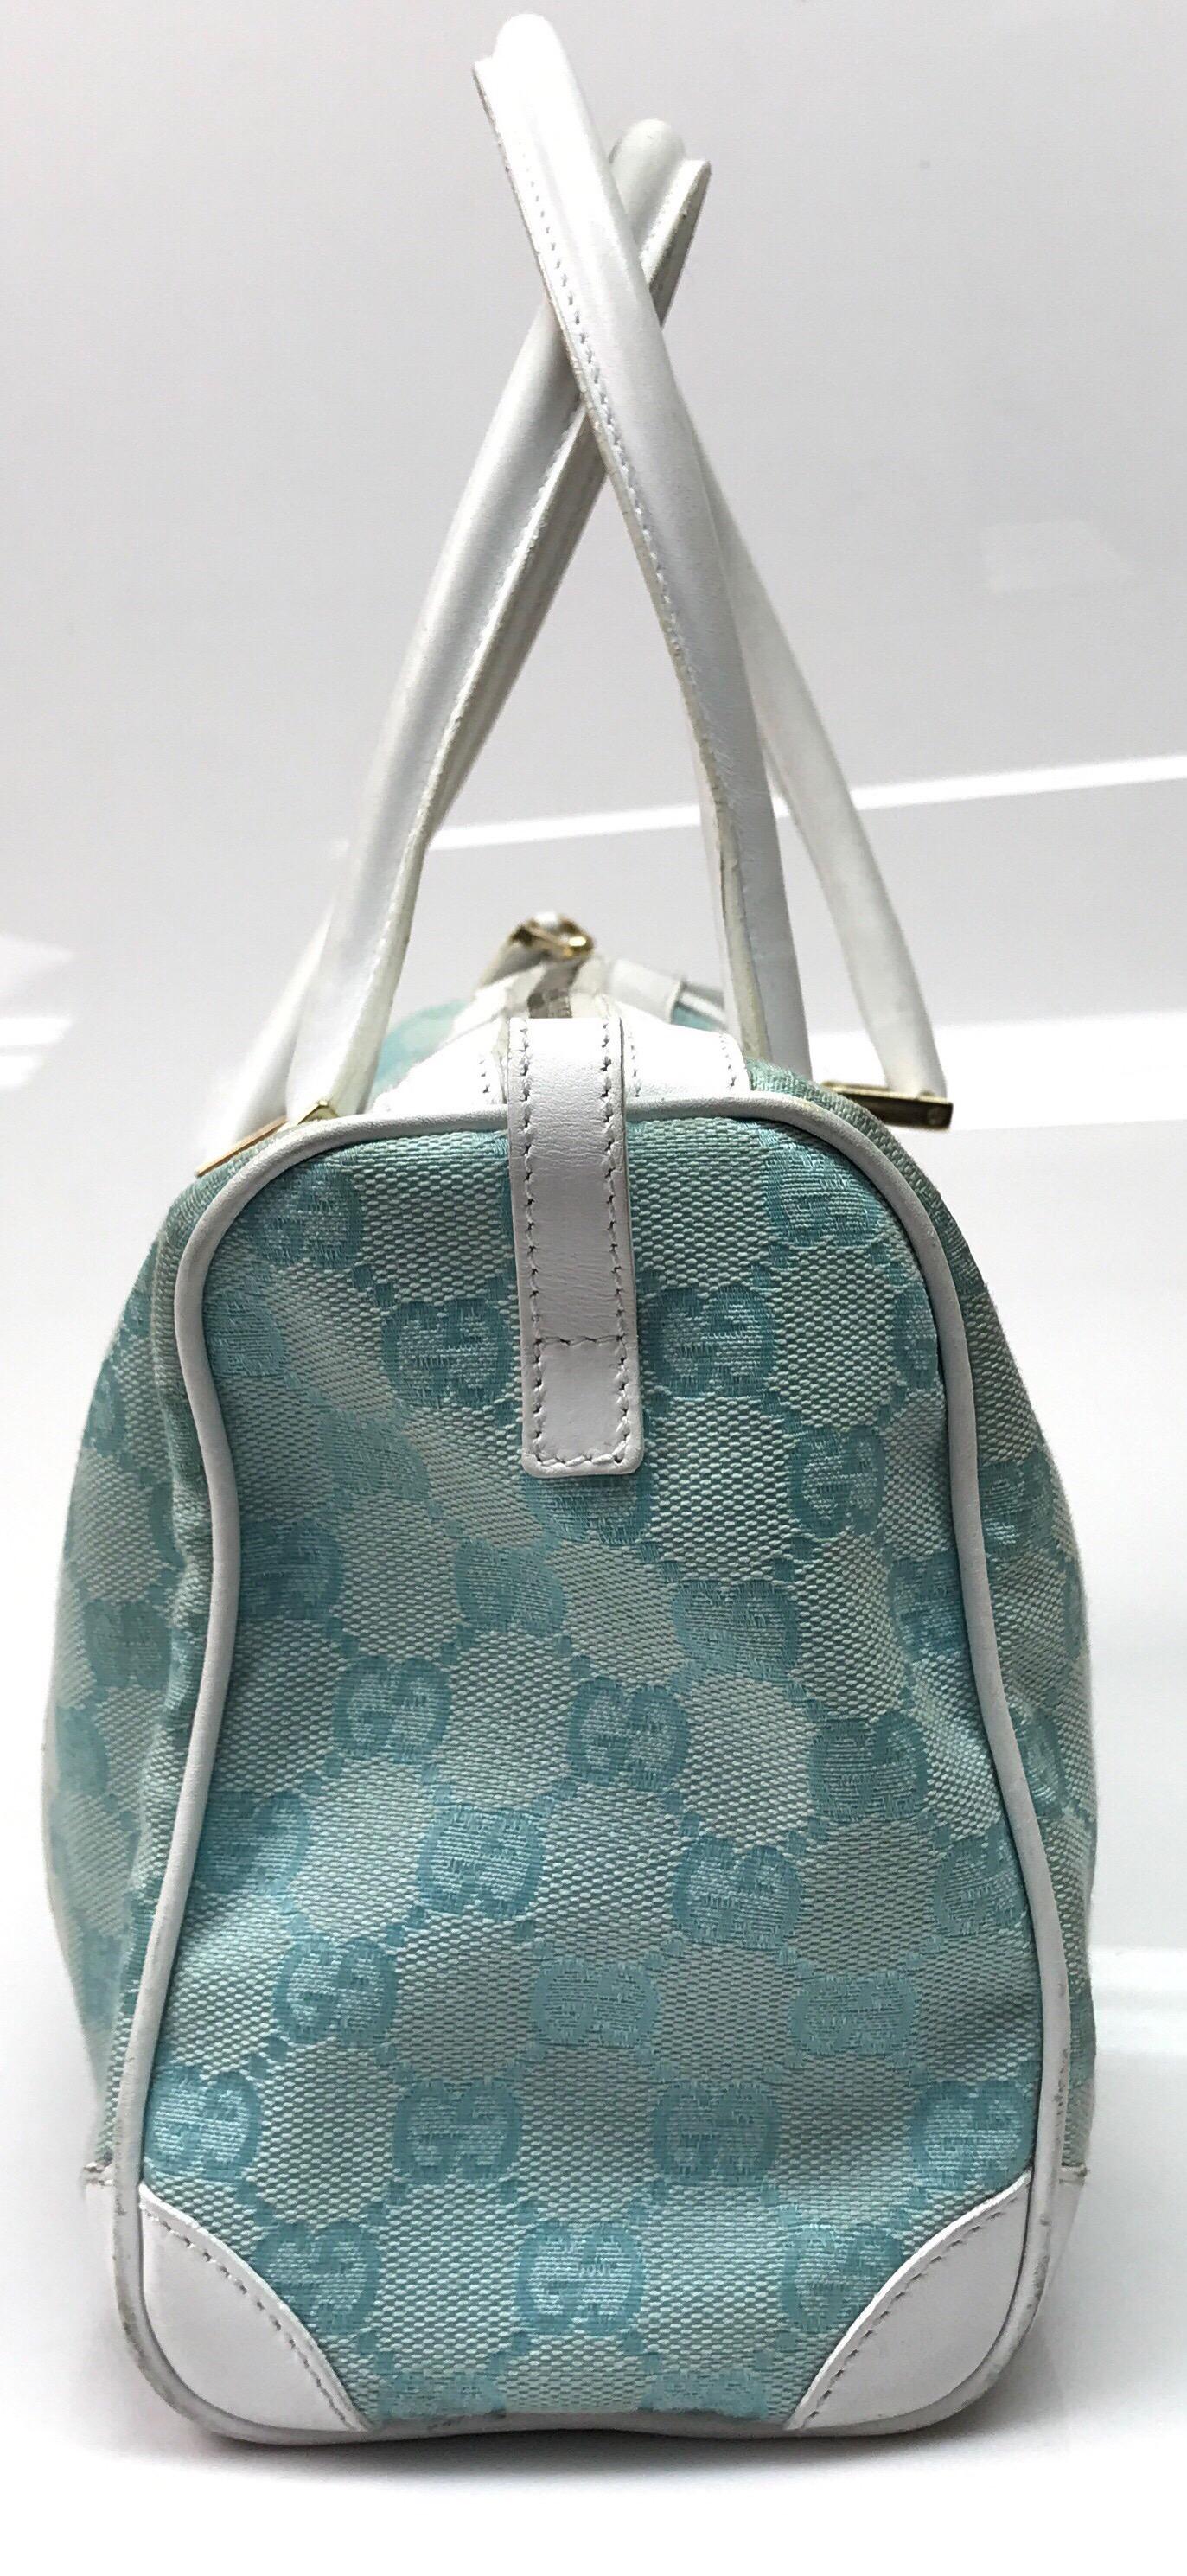 Gucci Light Blue & White Monogram Speedy Handbag. This adorable Gucci handbag is in good condition. It shows some sign of use with discoloration or fading of the monogrammed material along with some small cracking of the white leather, as shown is